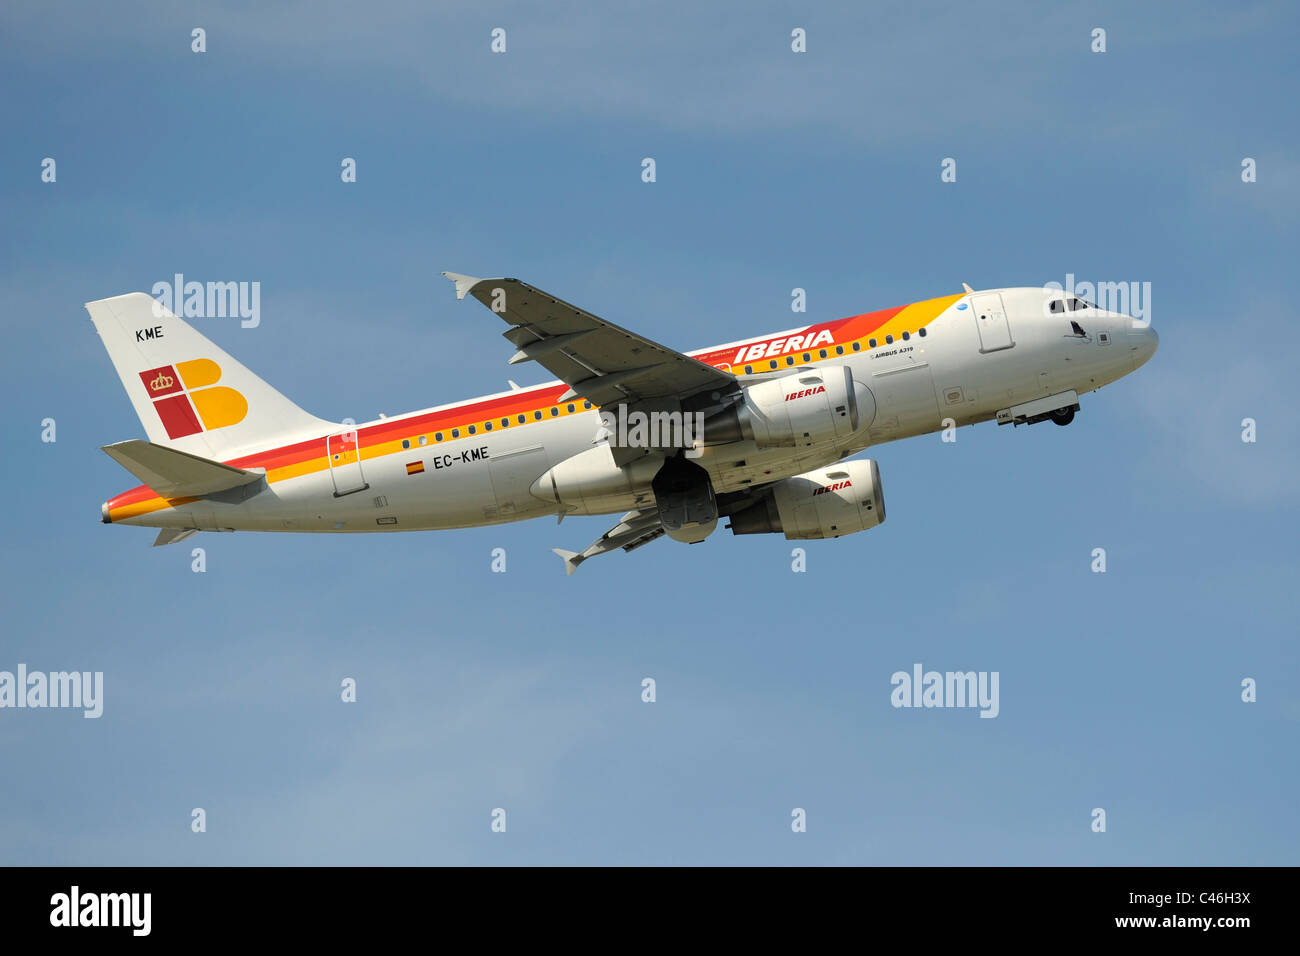 airplane Airbus A319 of spanish airline Iberia at take-off from airport Munich in Germany Stock Photo